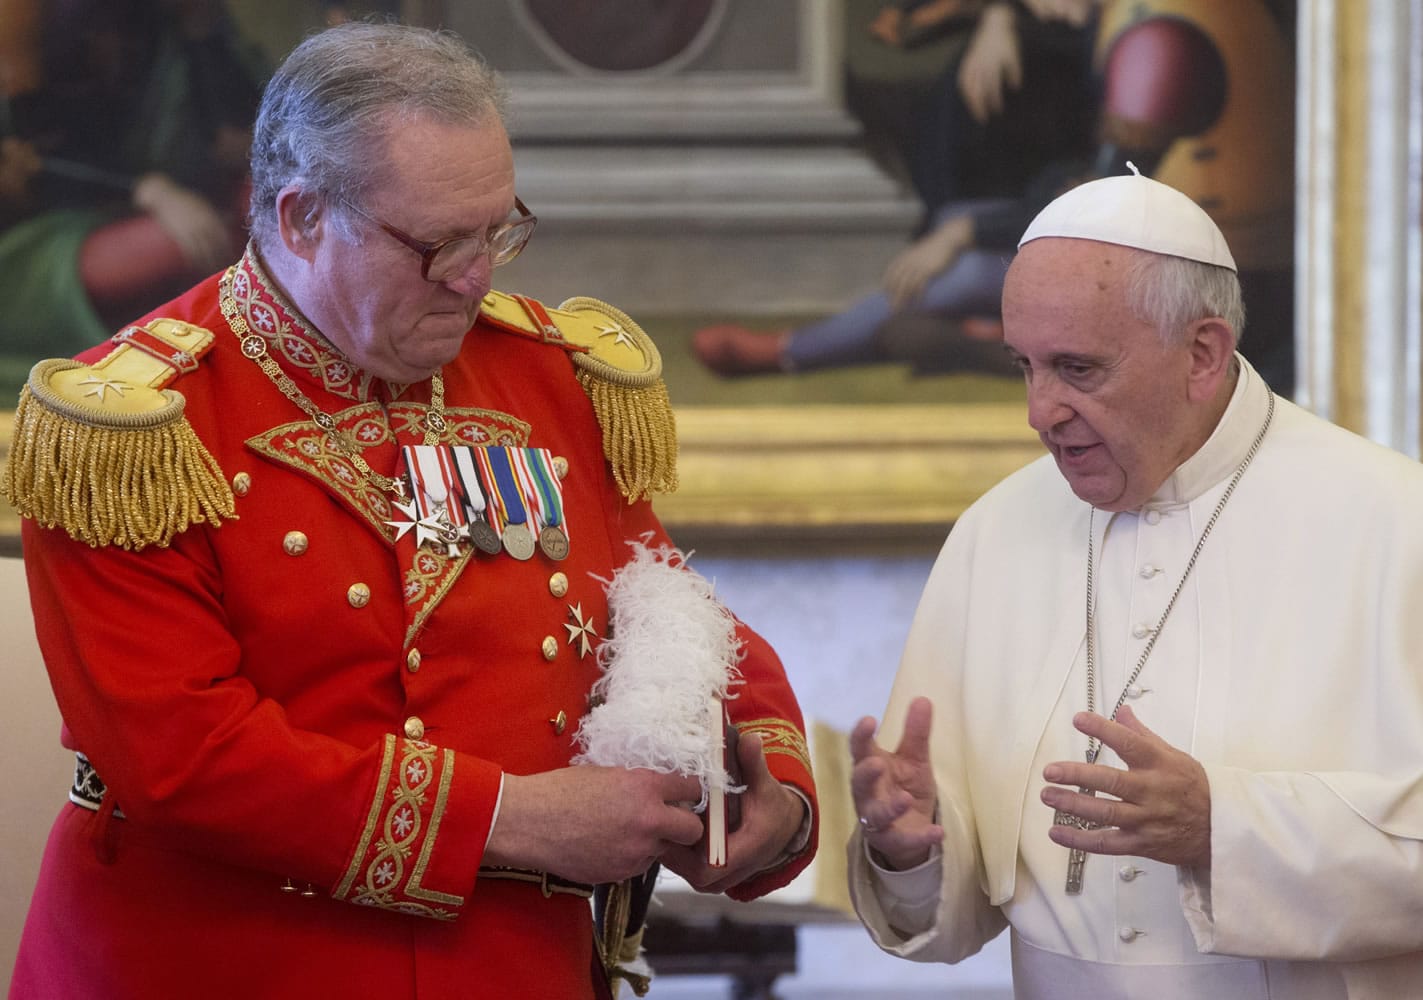 Pope Francis meets the Grand Master of the Sovereign Order of Malta, Fra' Matthew Festing, during a private audience in the pontiff's private library Friday at the Vatican.